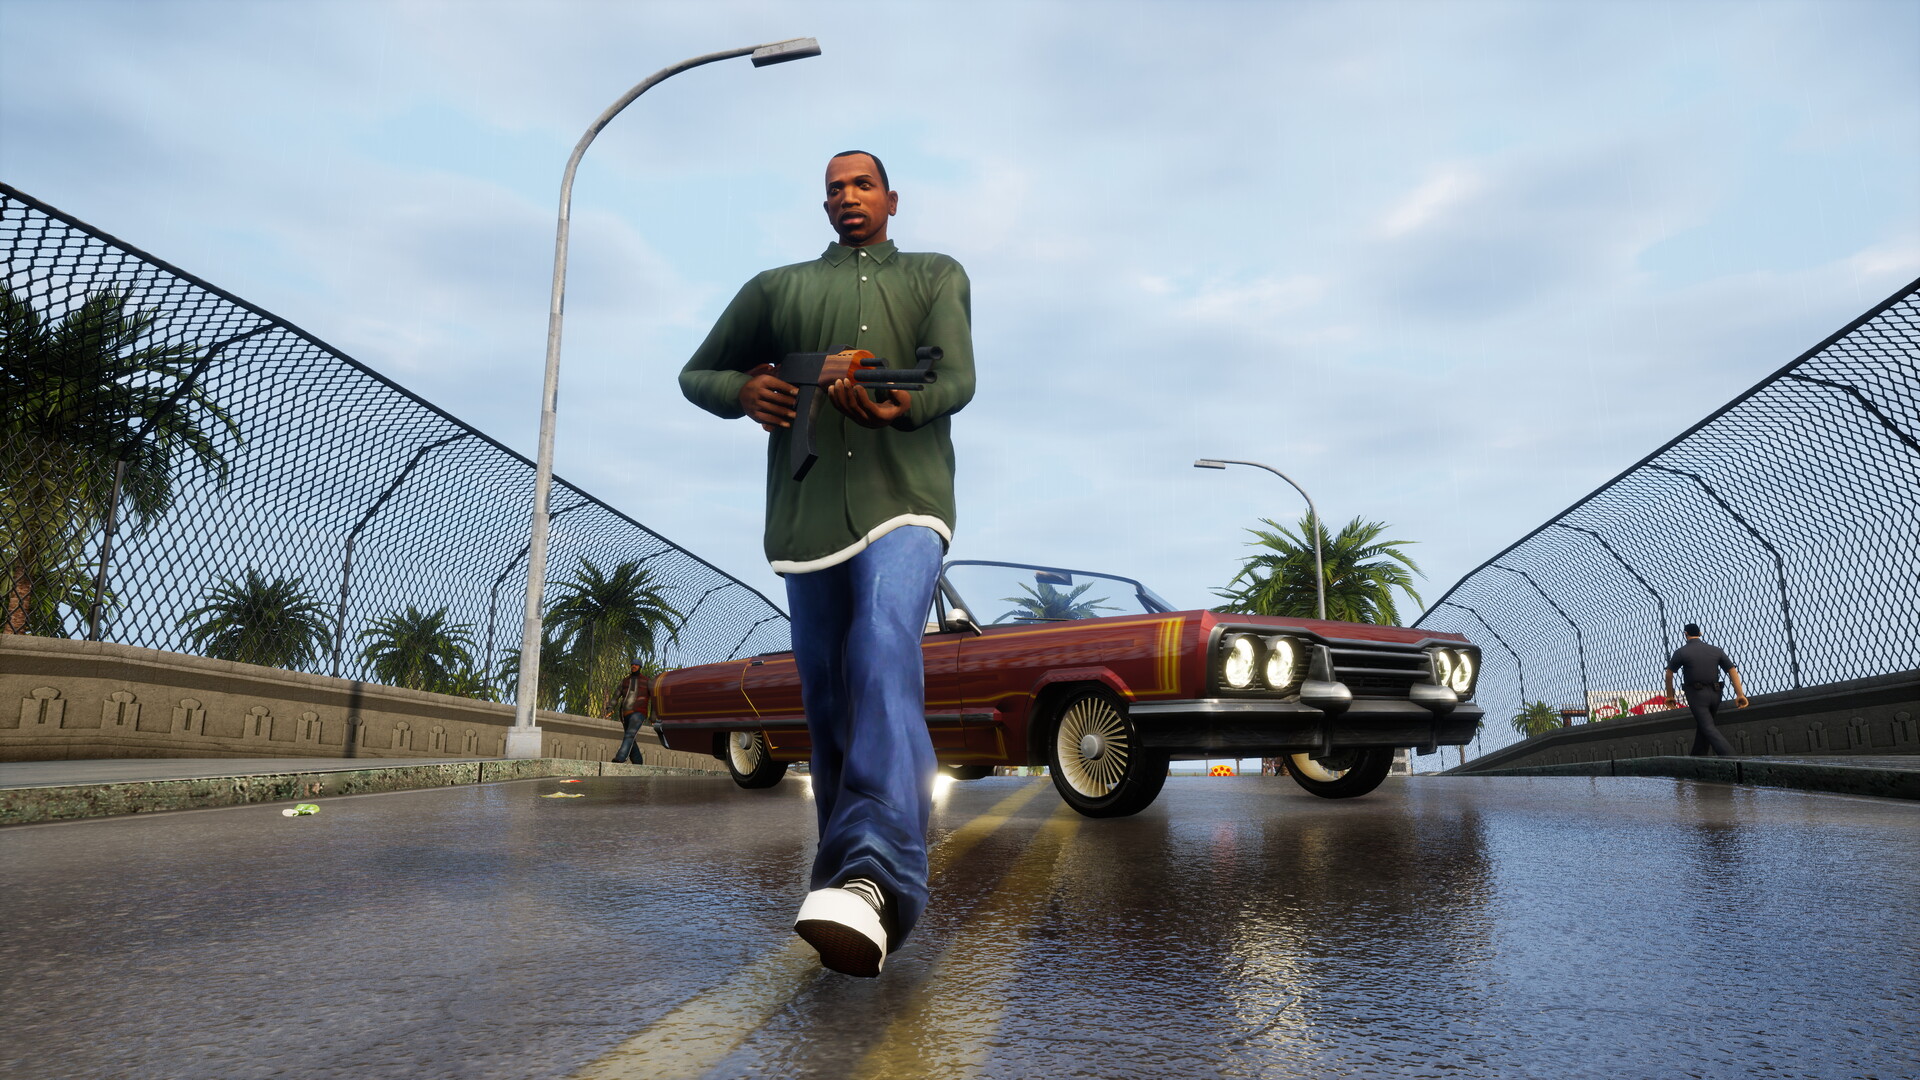 Save 50% on Grand Theft Auto: San Andreas – The Definitive Edition on Steam